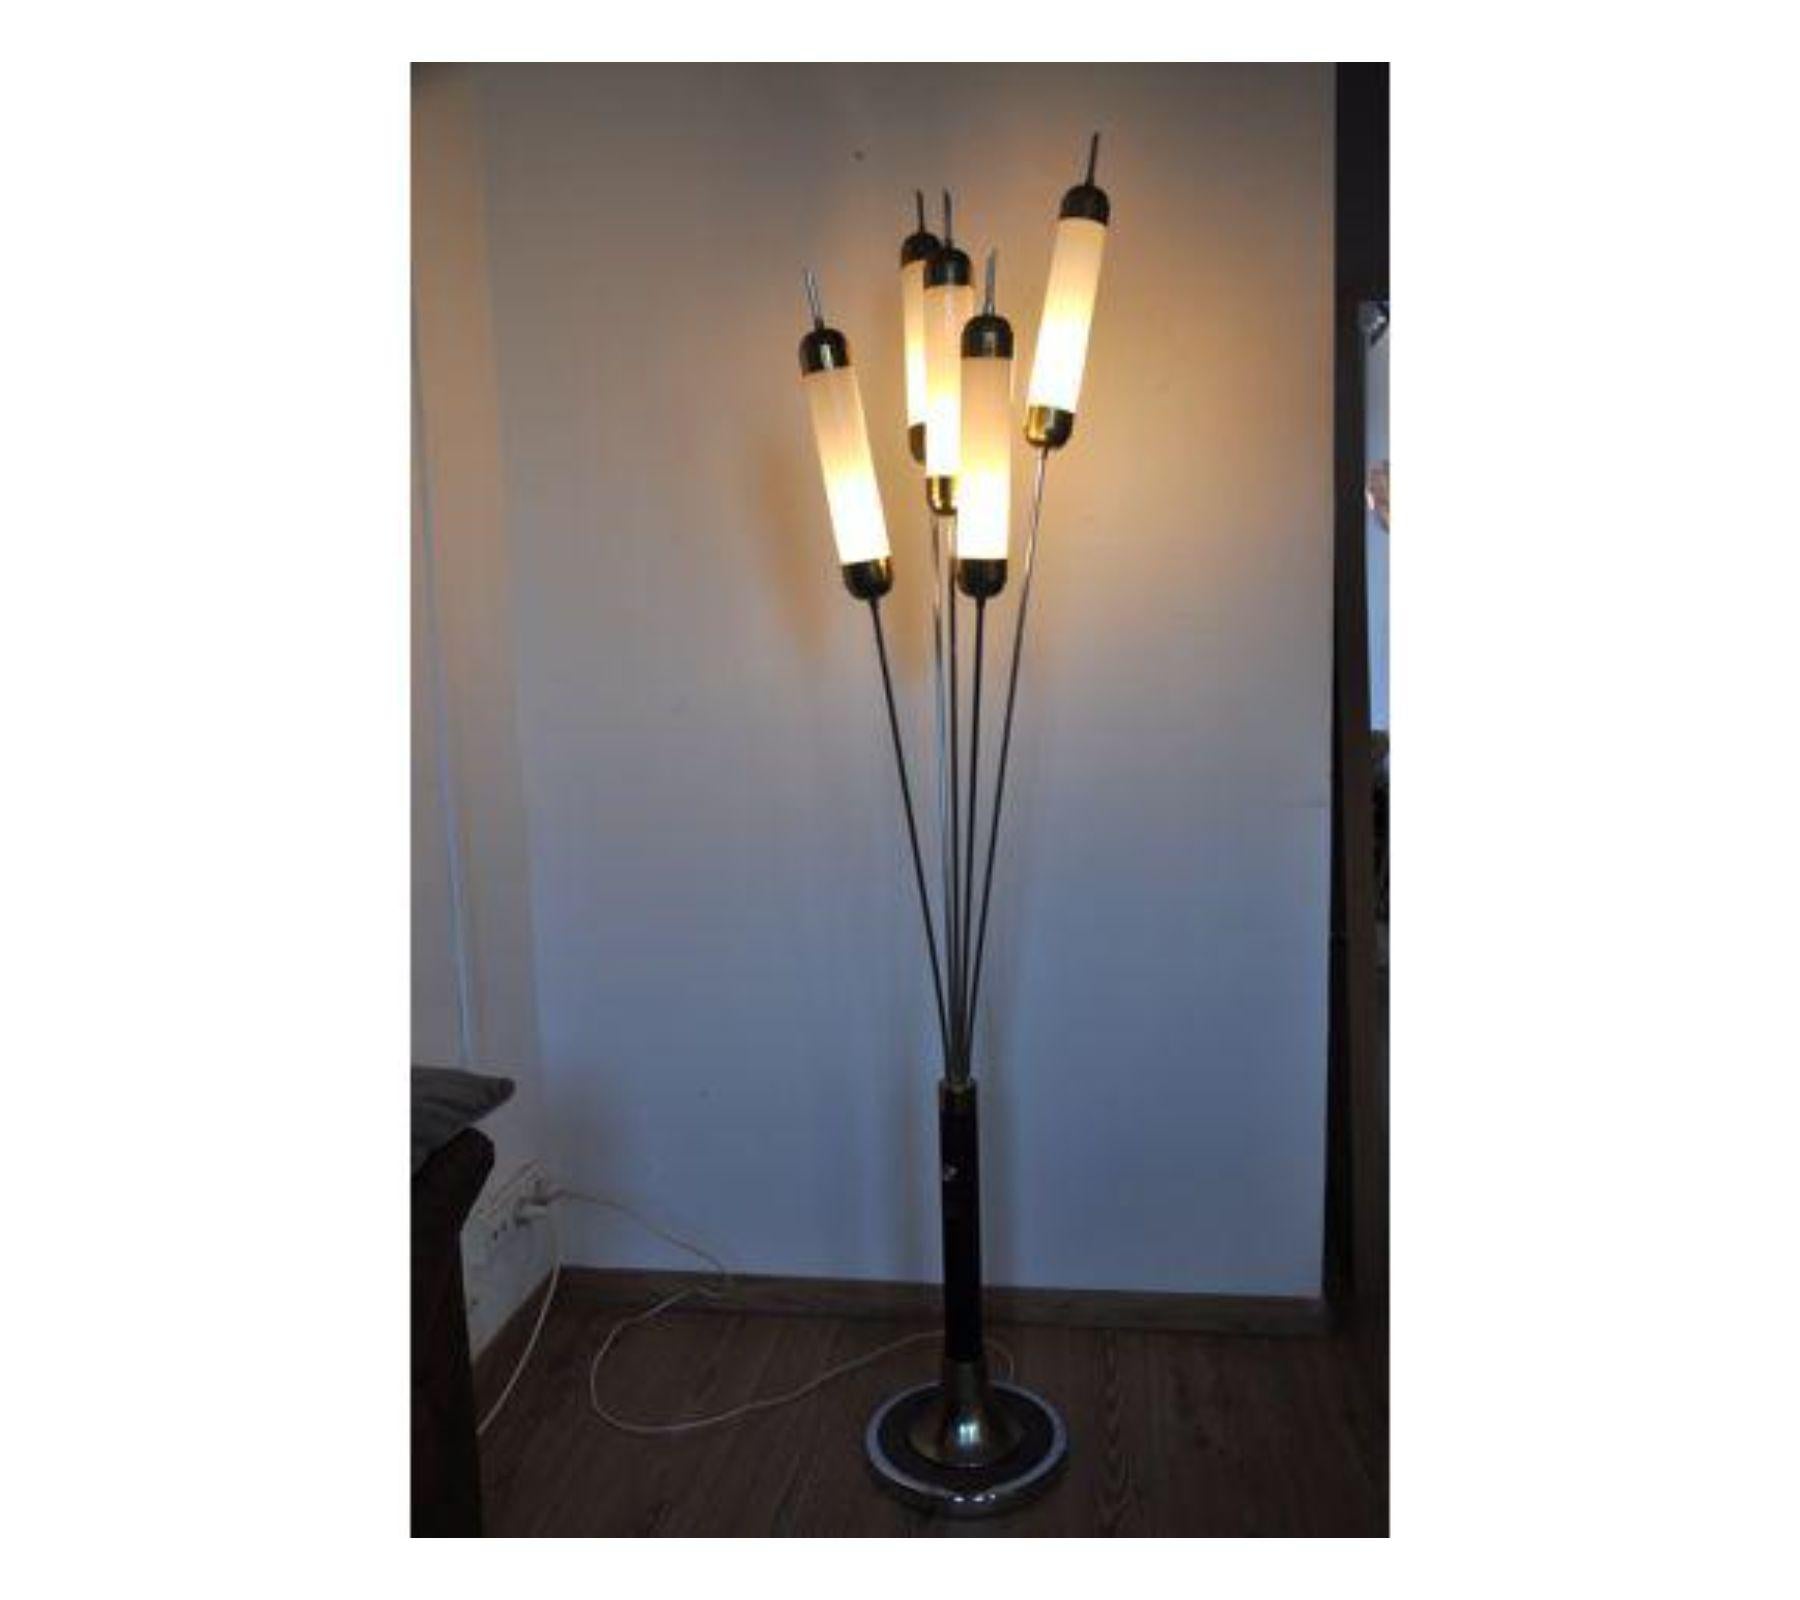 Superb Italian floor lamp designed by Carlo Nason in Murano, Italy, circa 1970. lamp composed of 5 stalks in the form of reeds made out of Murano glasses. 3 mode of illumination (1/3/5 bulb on). A unique piece of design that will be great a